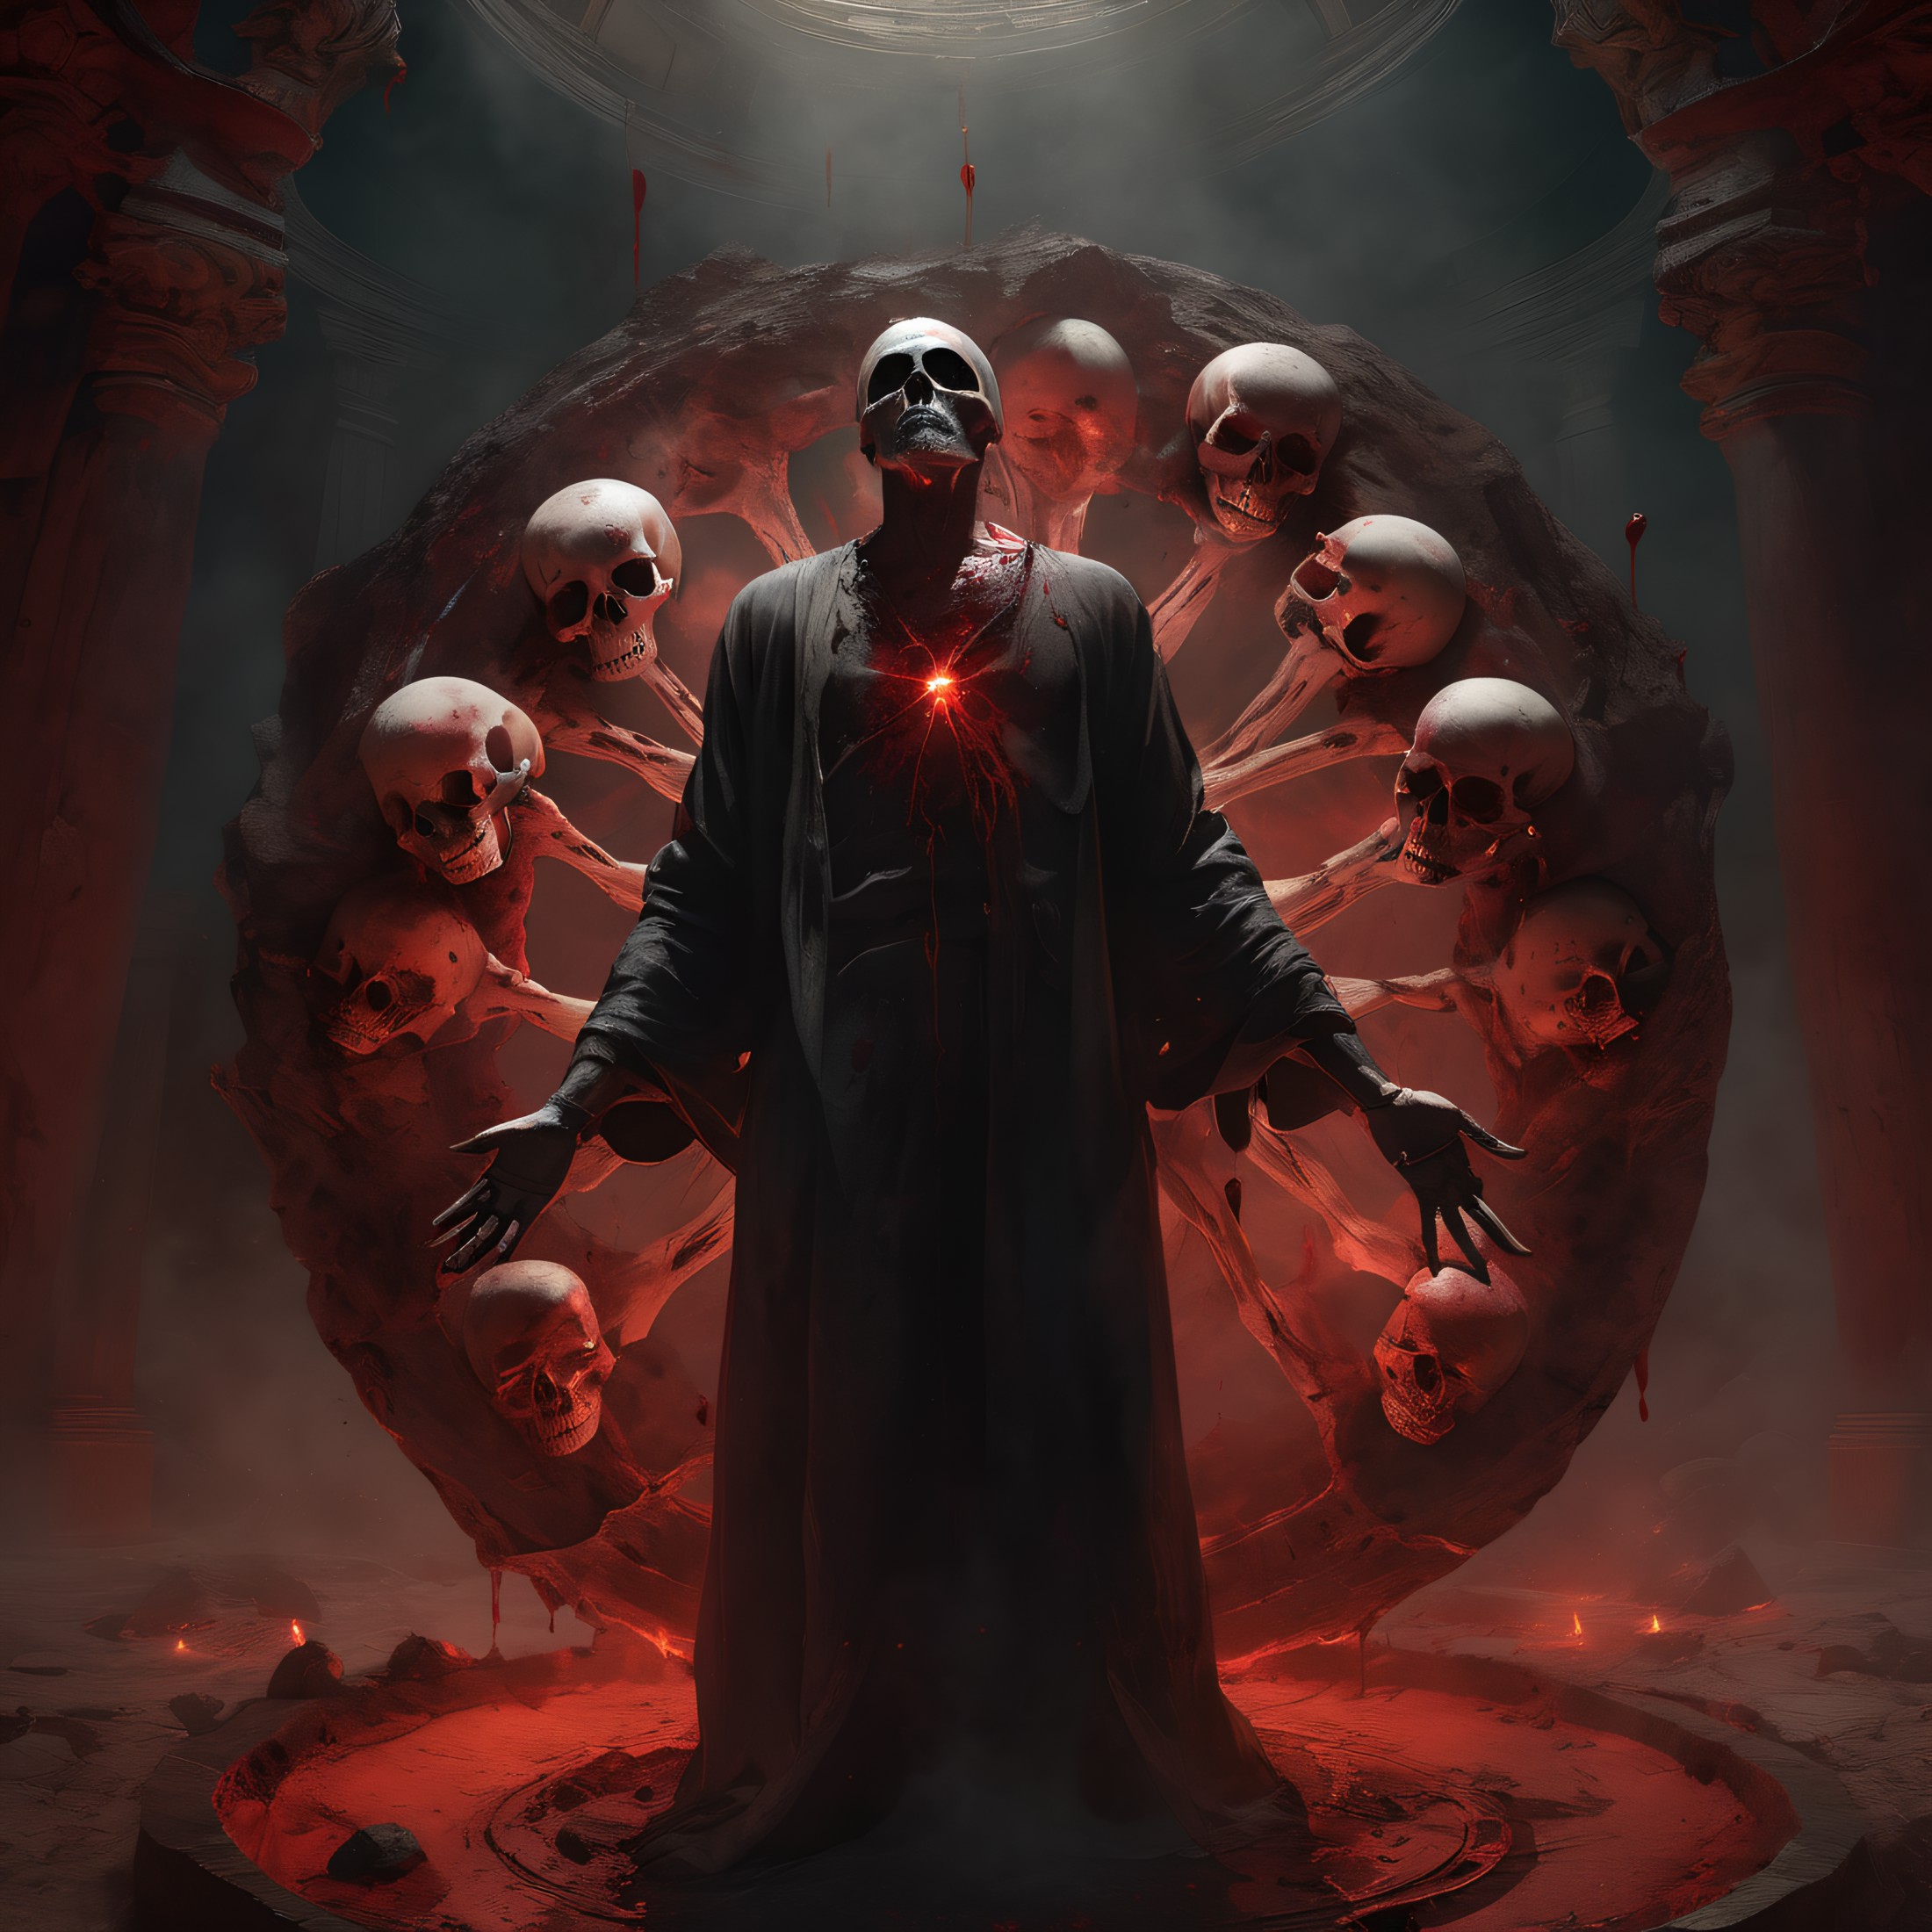 demo lord , standing in the center of a bloody summoning circle,(holding a skull) close up front view , glowing eyes, bloo...